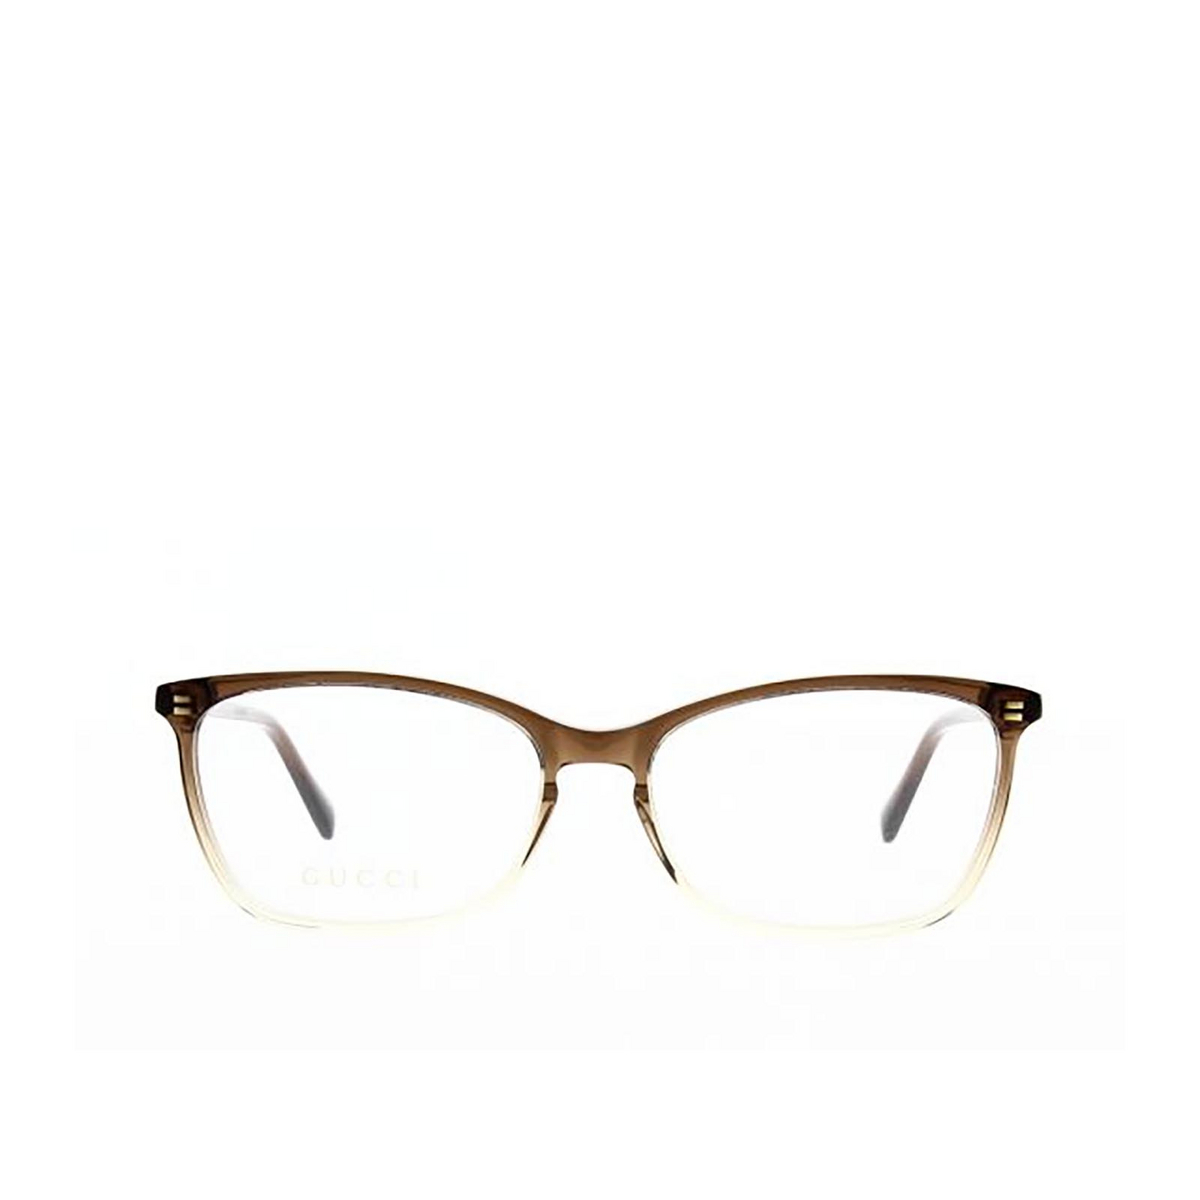 Gucci GG0548O Eyeglasses 007 Shiny Gradient Brown/Nude - front view